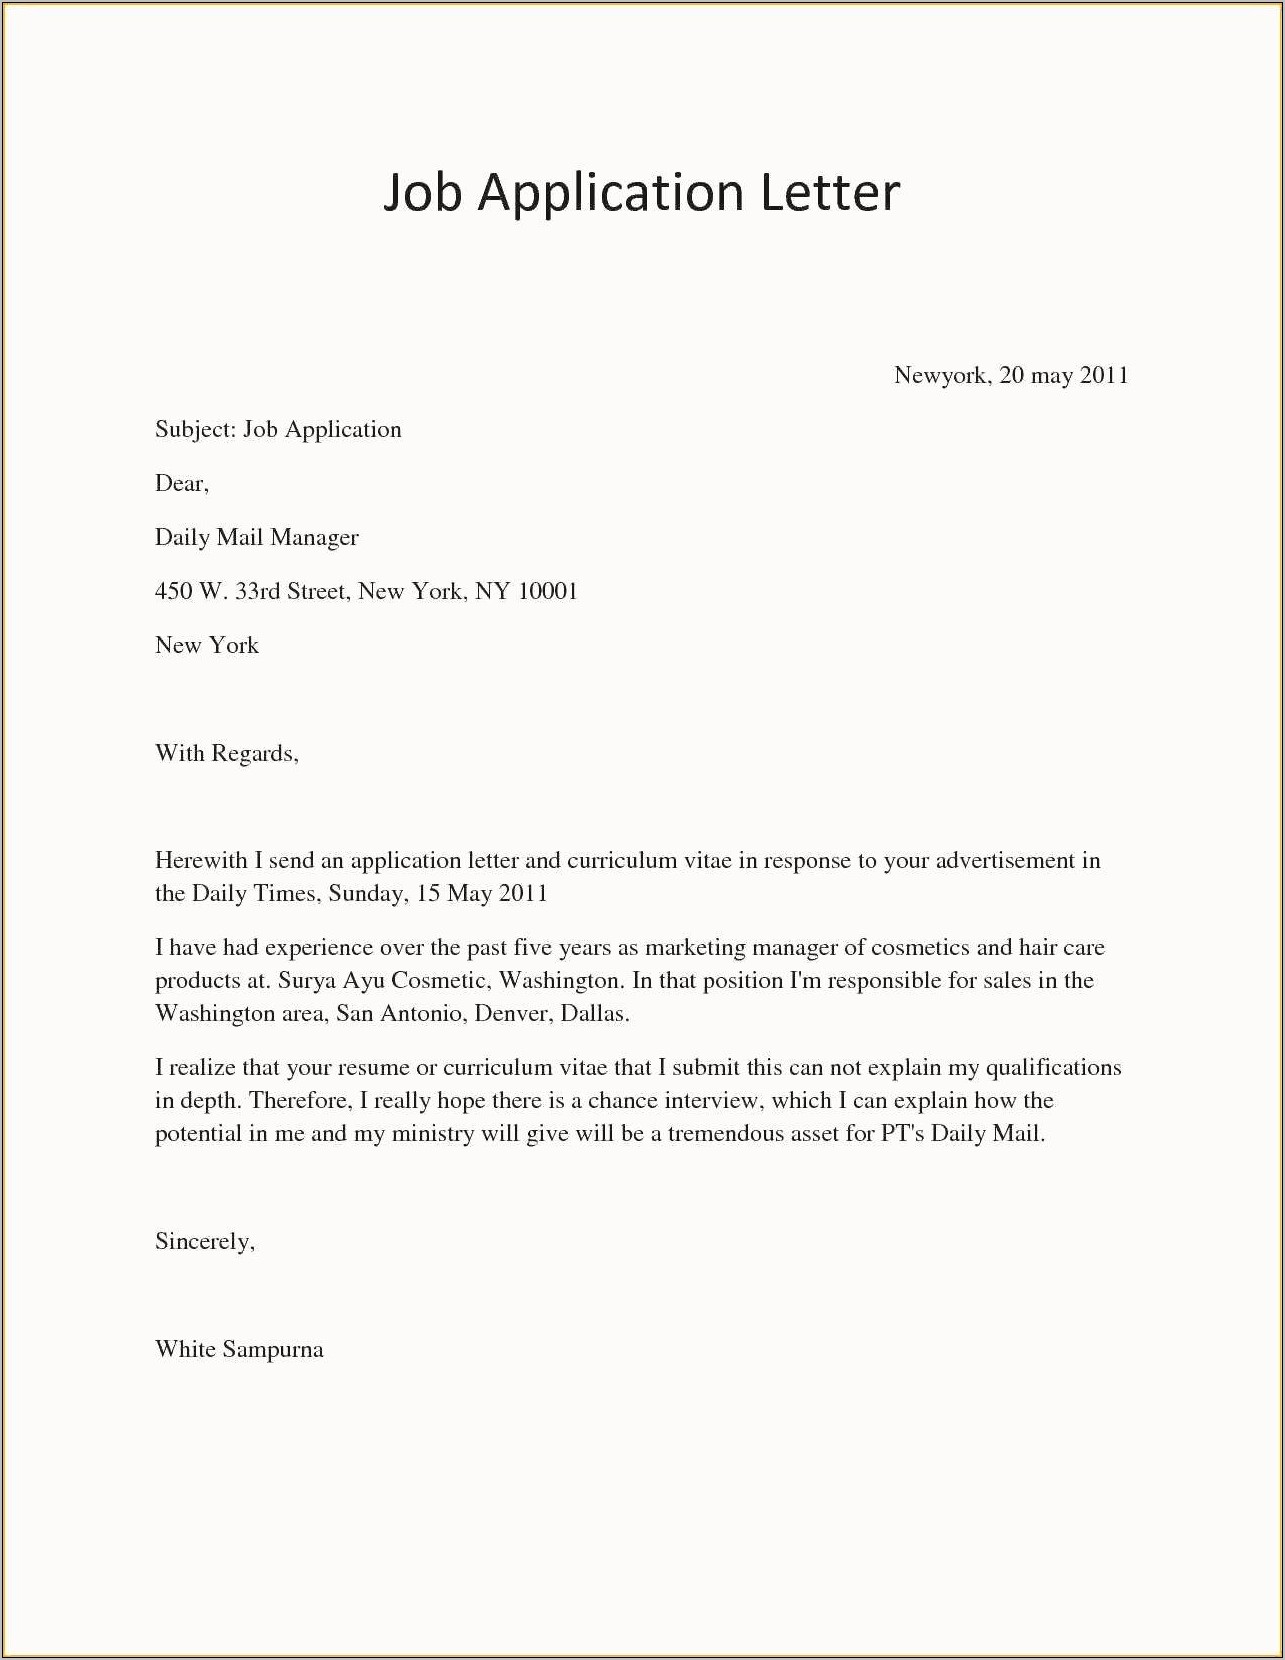 Good Response For Applying With Resume